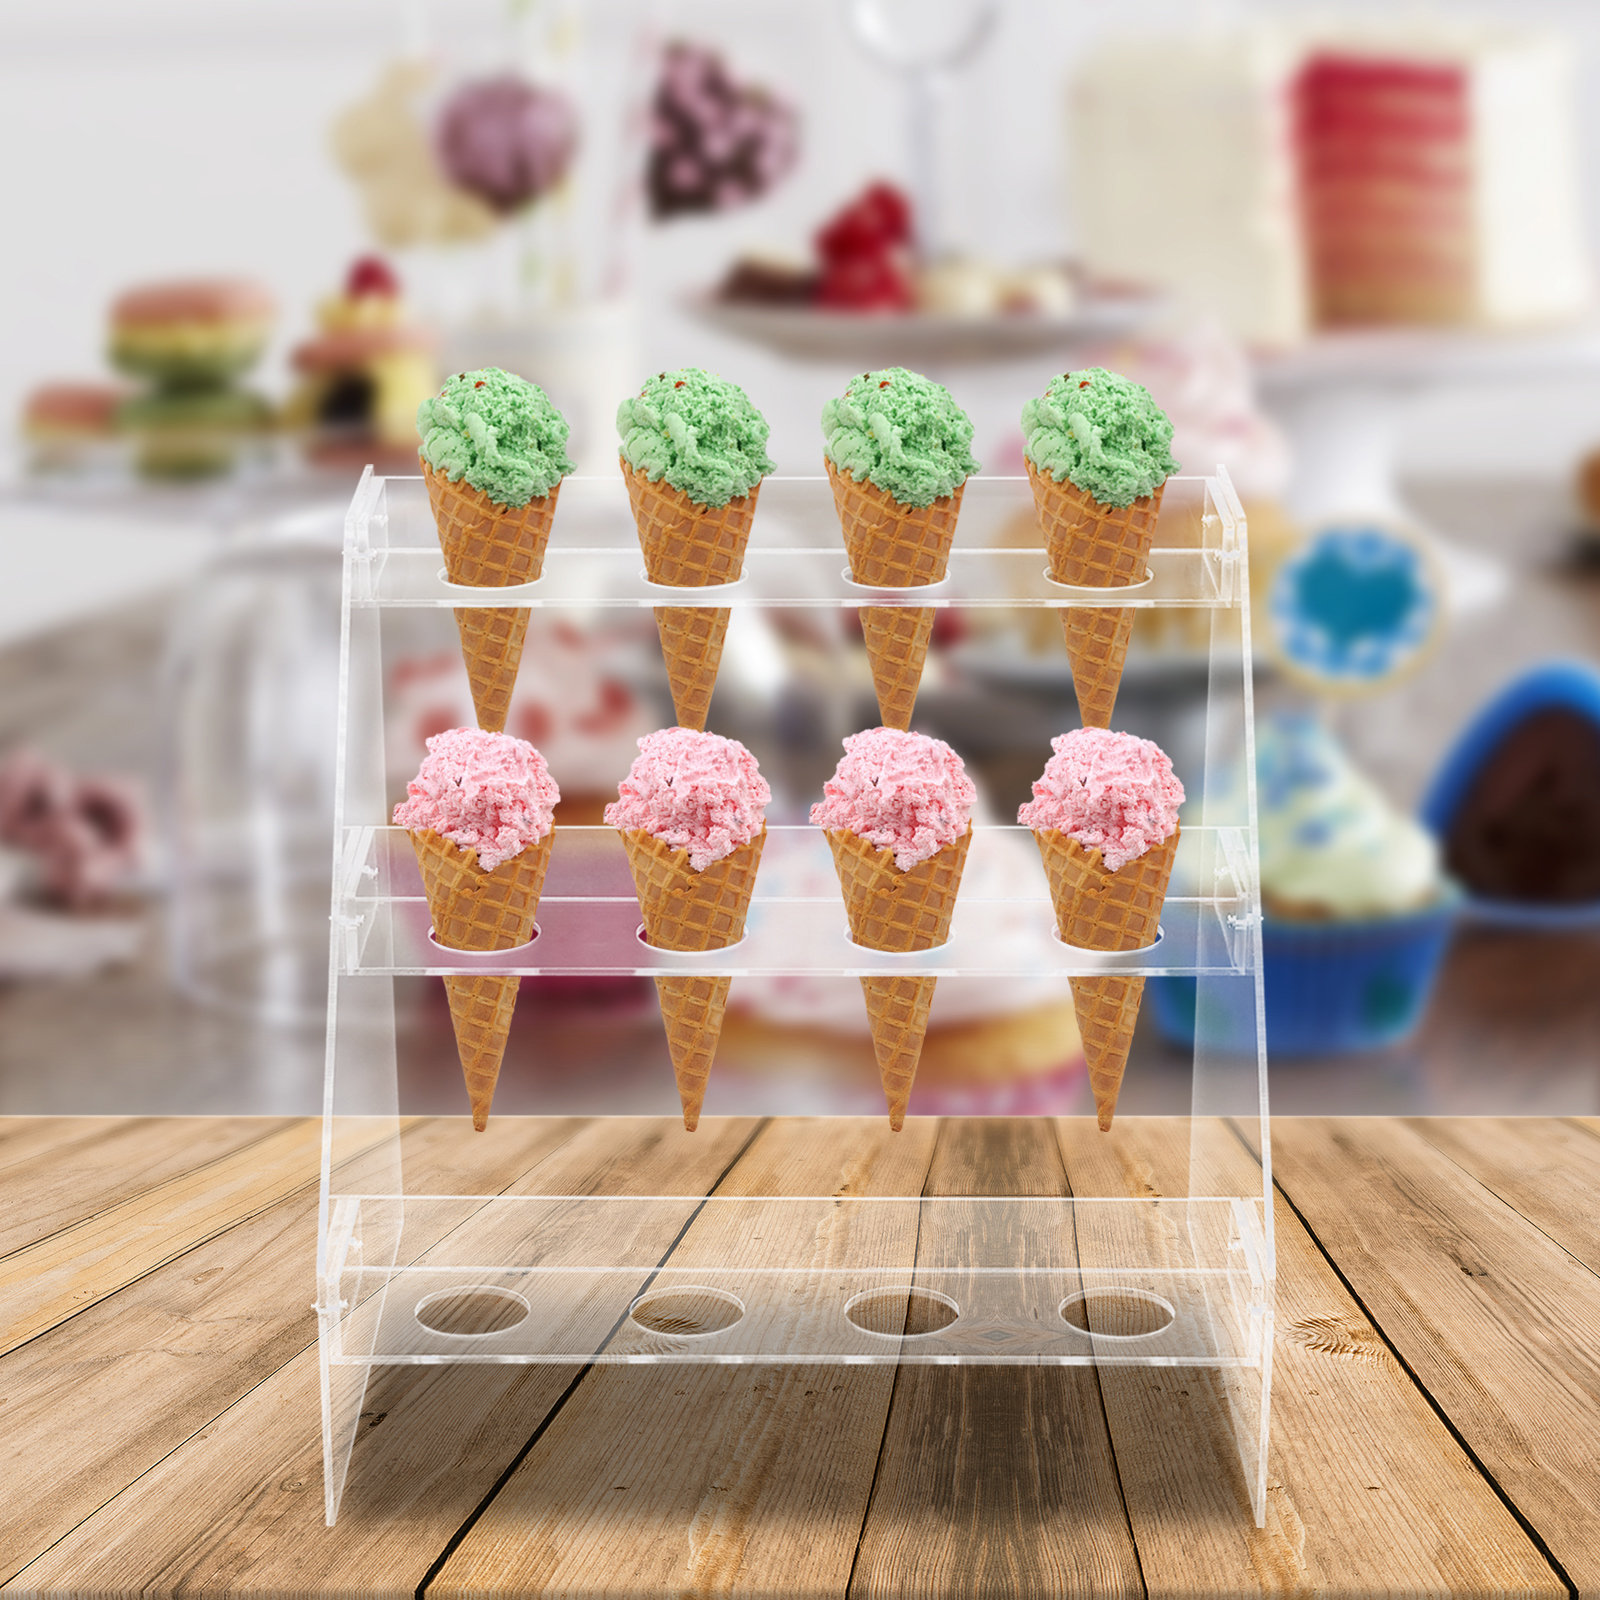 16 Mini Ice Cream Cone Holder Party Favor Display Stand - Clear